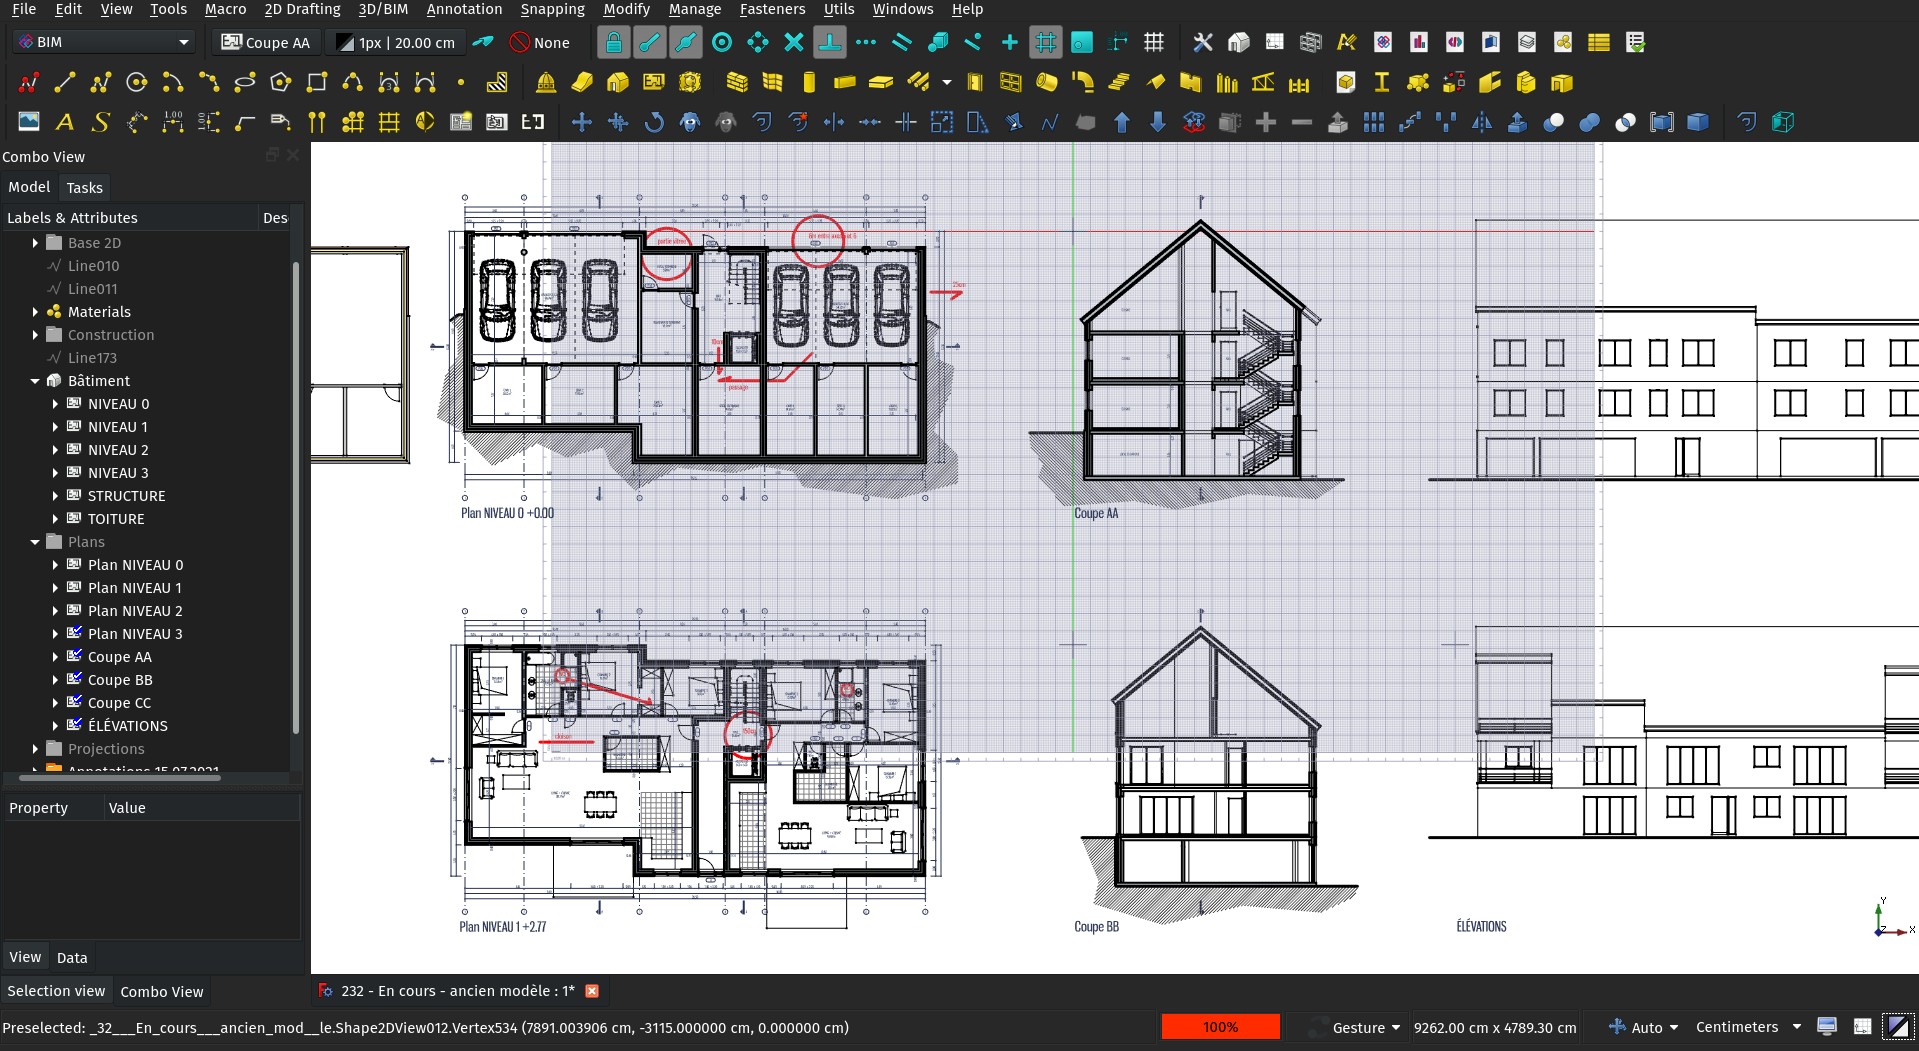 A screenshot of FreeCAD showing cool 2D CAD drawings